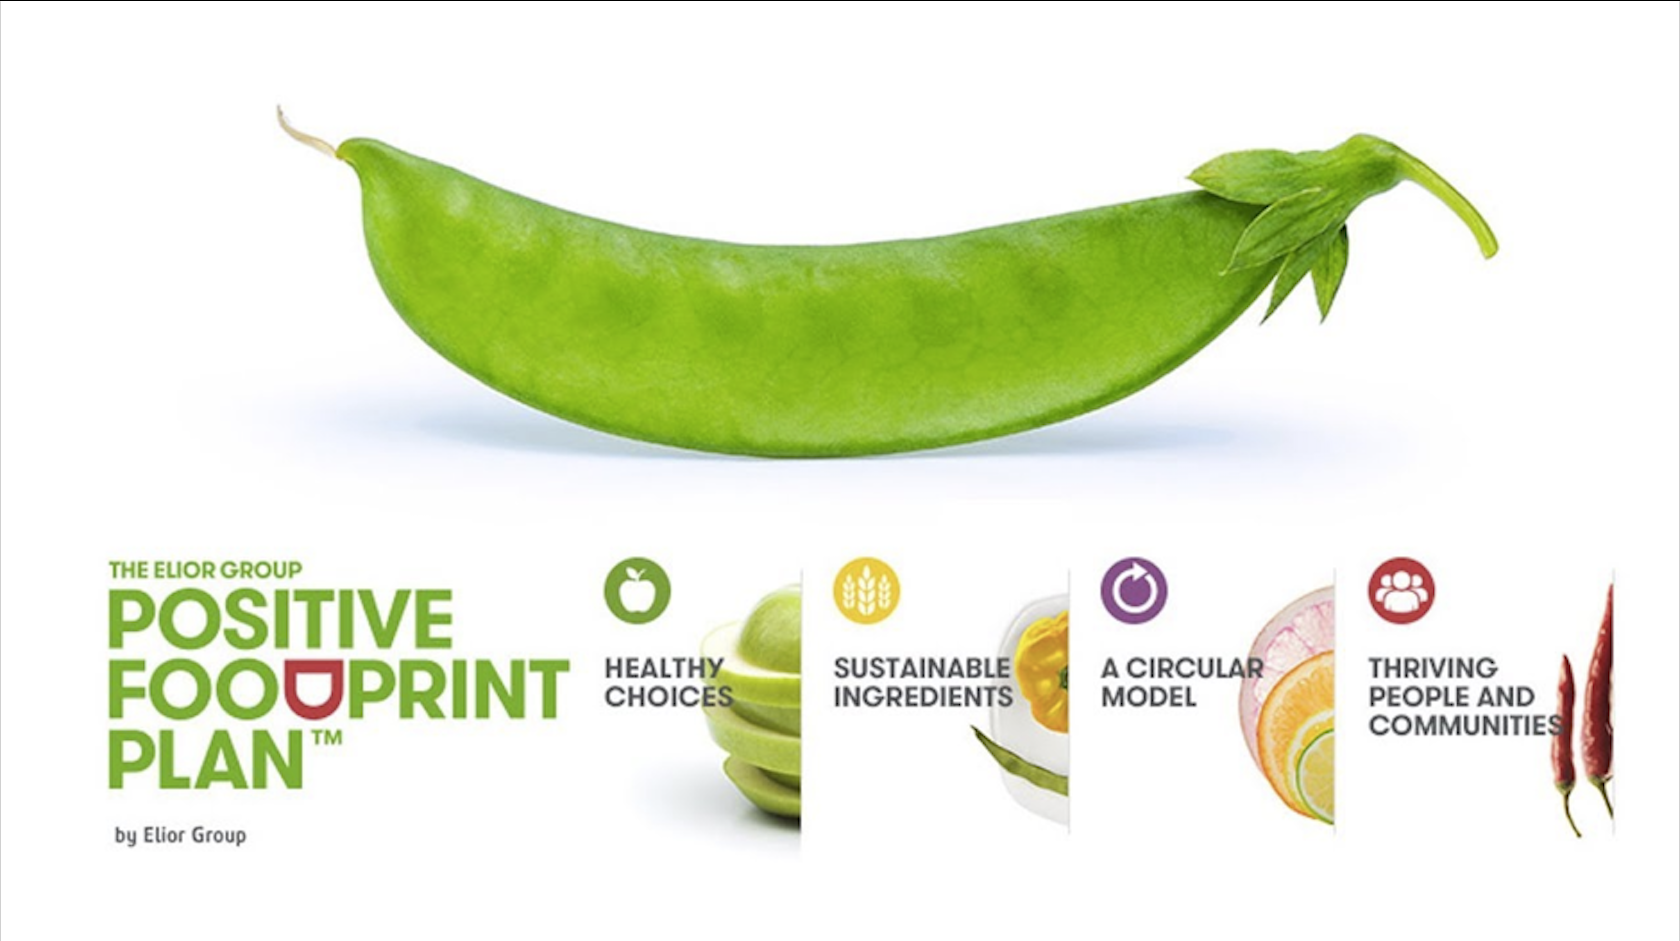 An image from the Elior Positive Foodprint Plan - a bright green runner bean that looks a bit like a smile. 